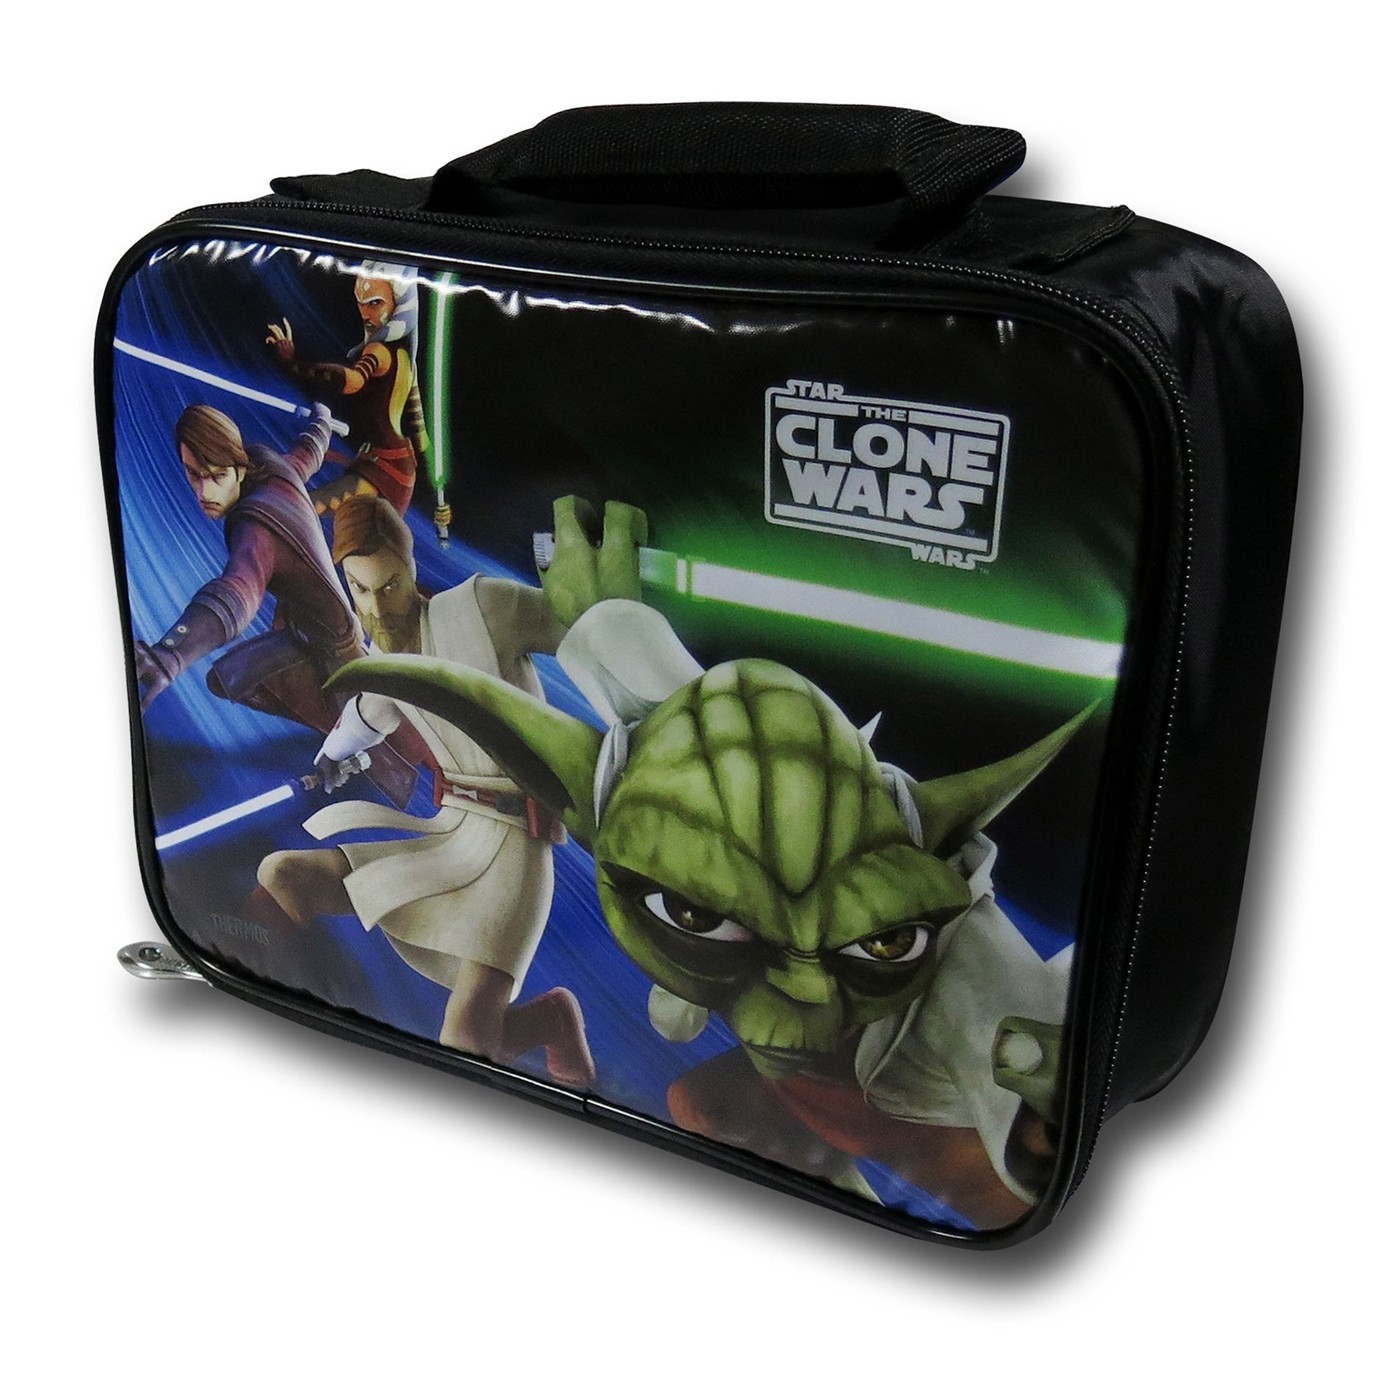 Star Wars Return of the Jedi Lunch Box with Thermos Bottle